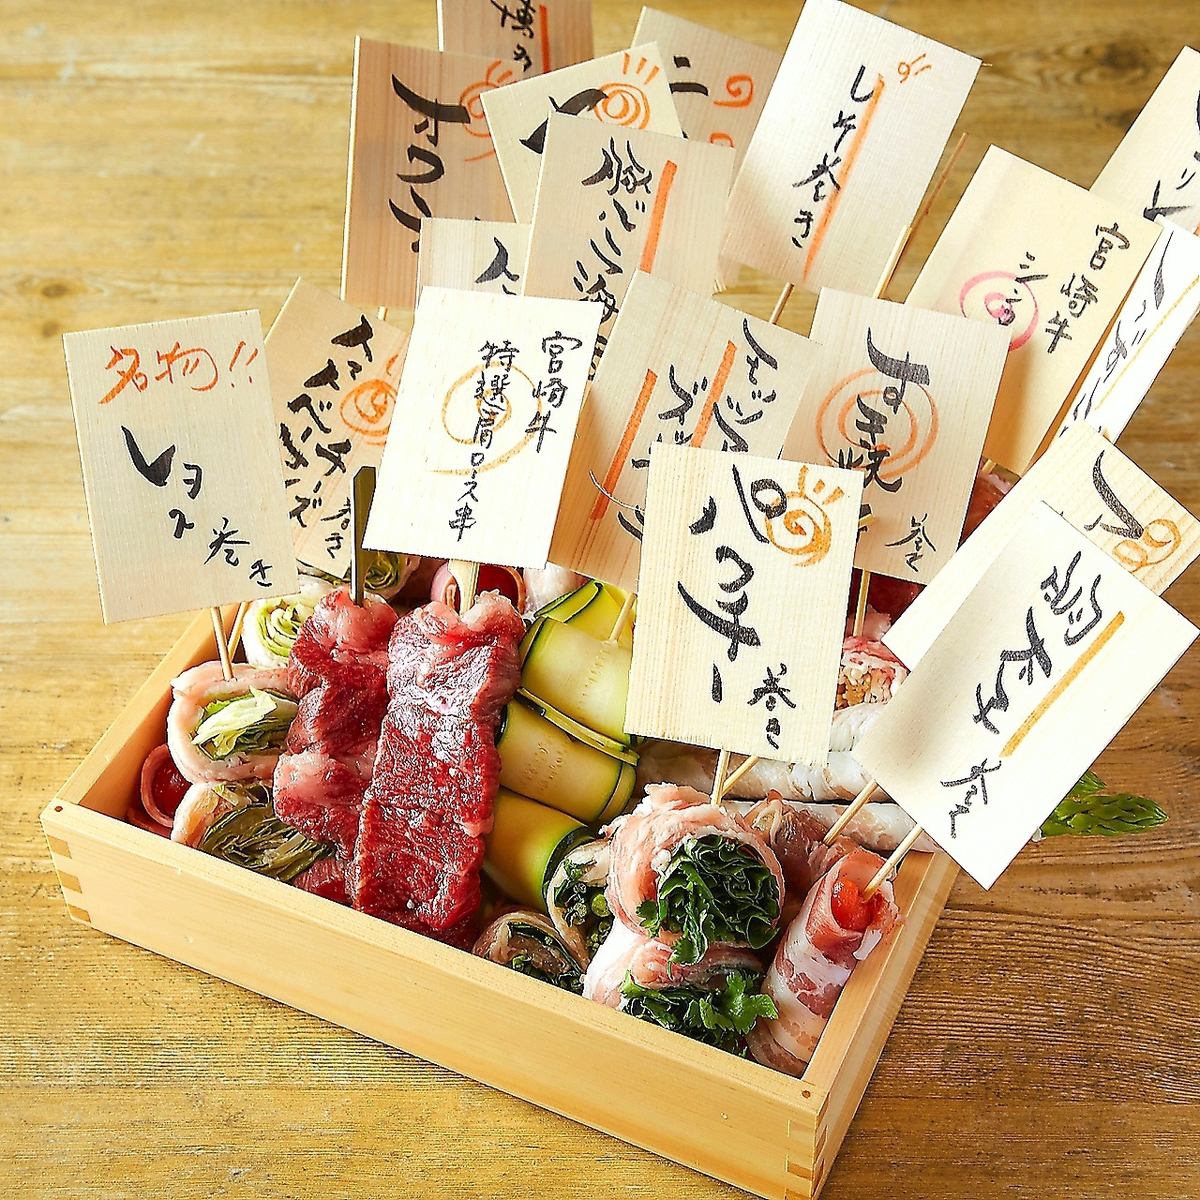 ◆Specialty: vegetable roll skewers ◆Cheers to beer with yakitori in one hand tonight!